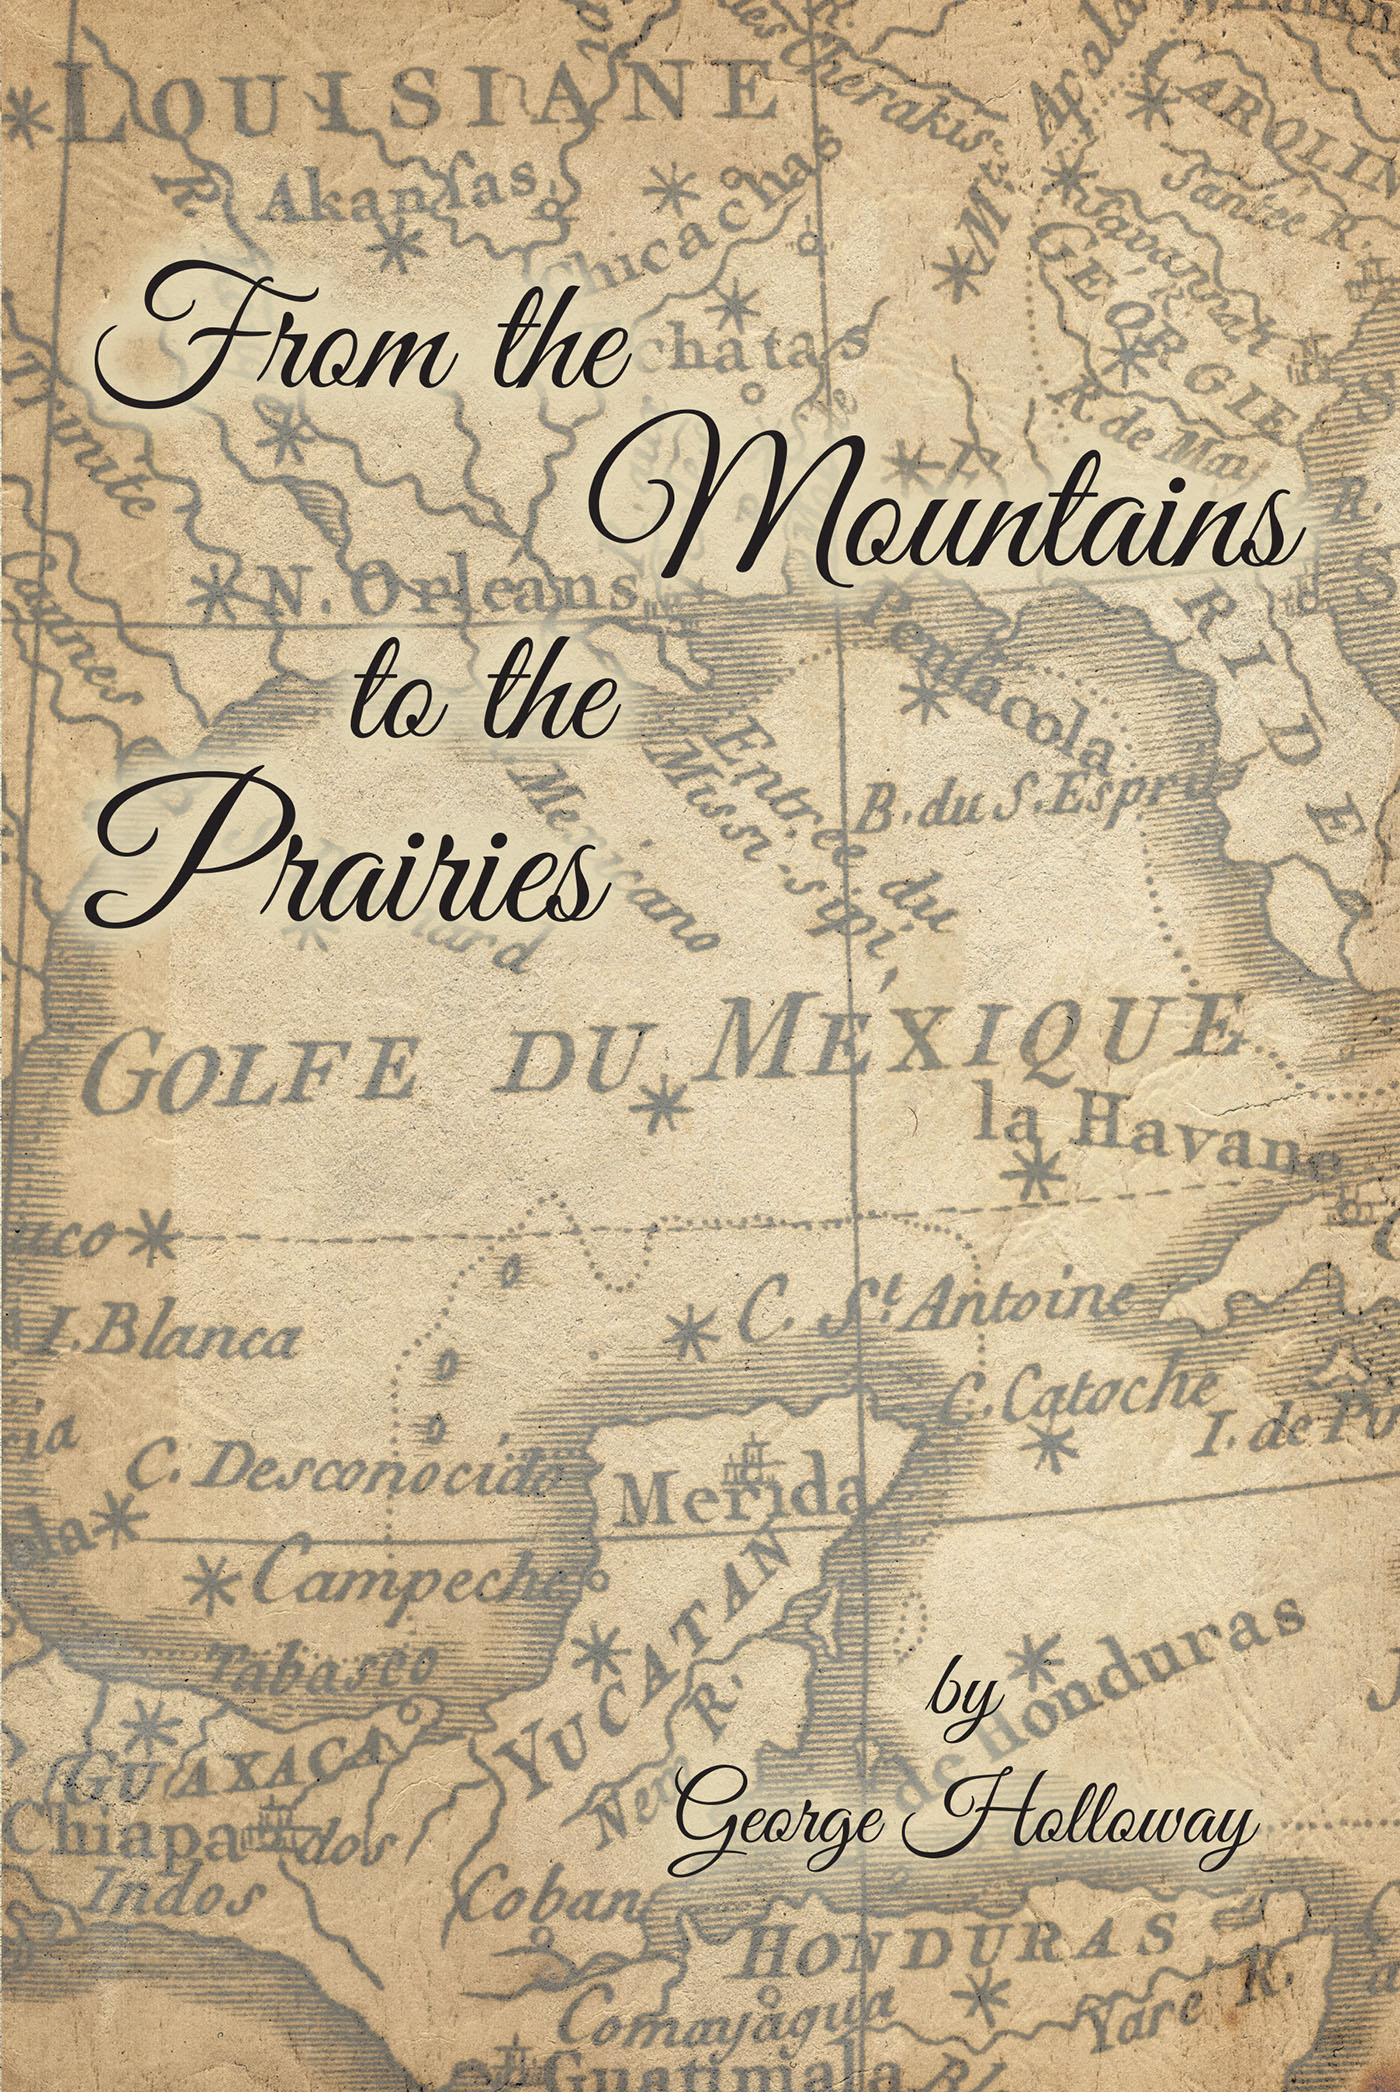 George Holloway’s Book "From the Mountains to the Prairies" is a Compelling True Story Following One Family’s Travels During the Revolutionary Period of American History